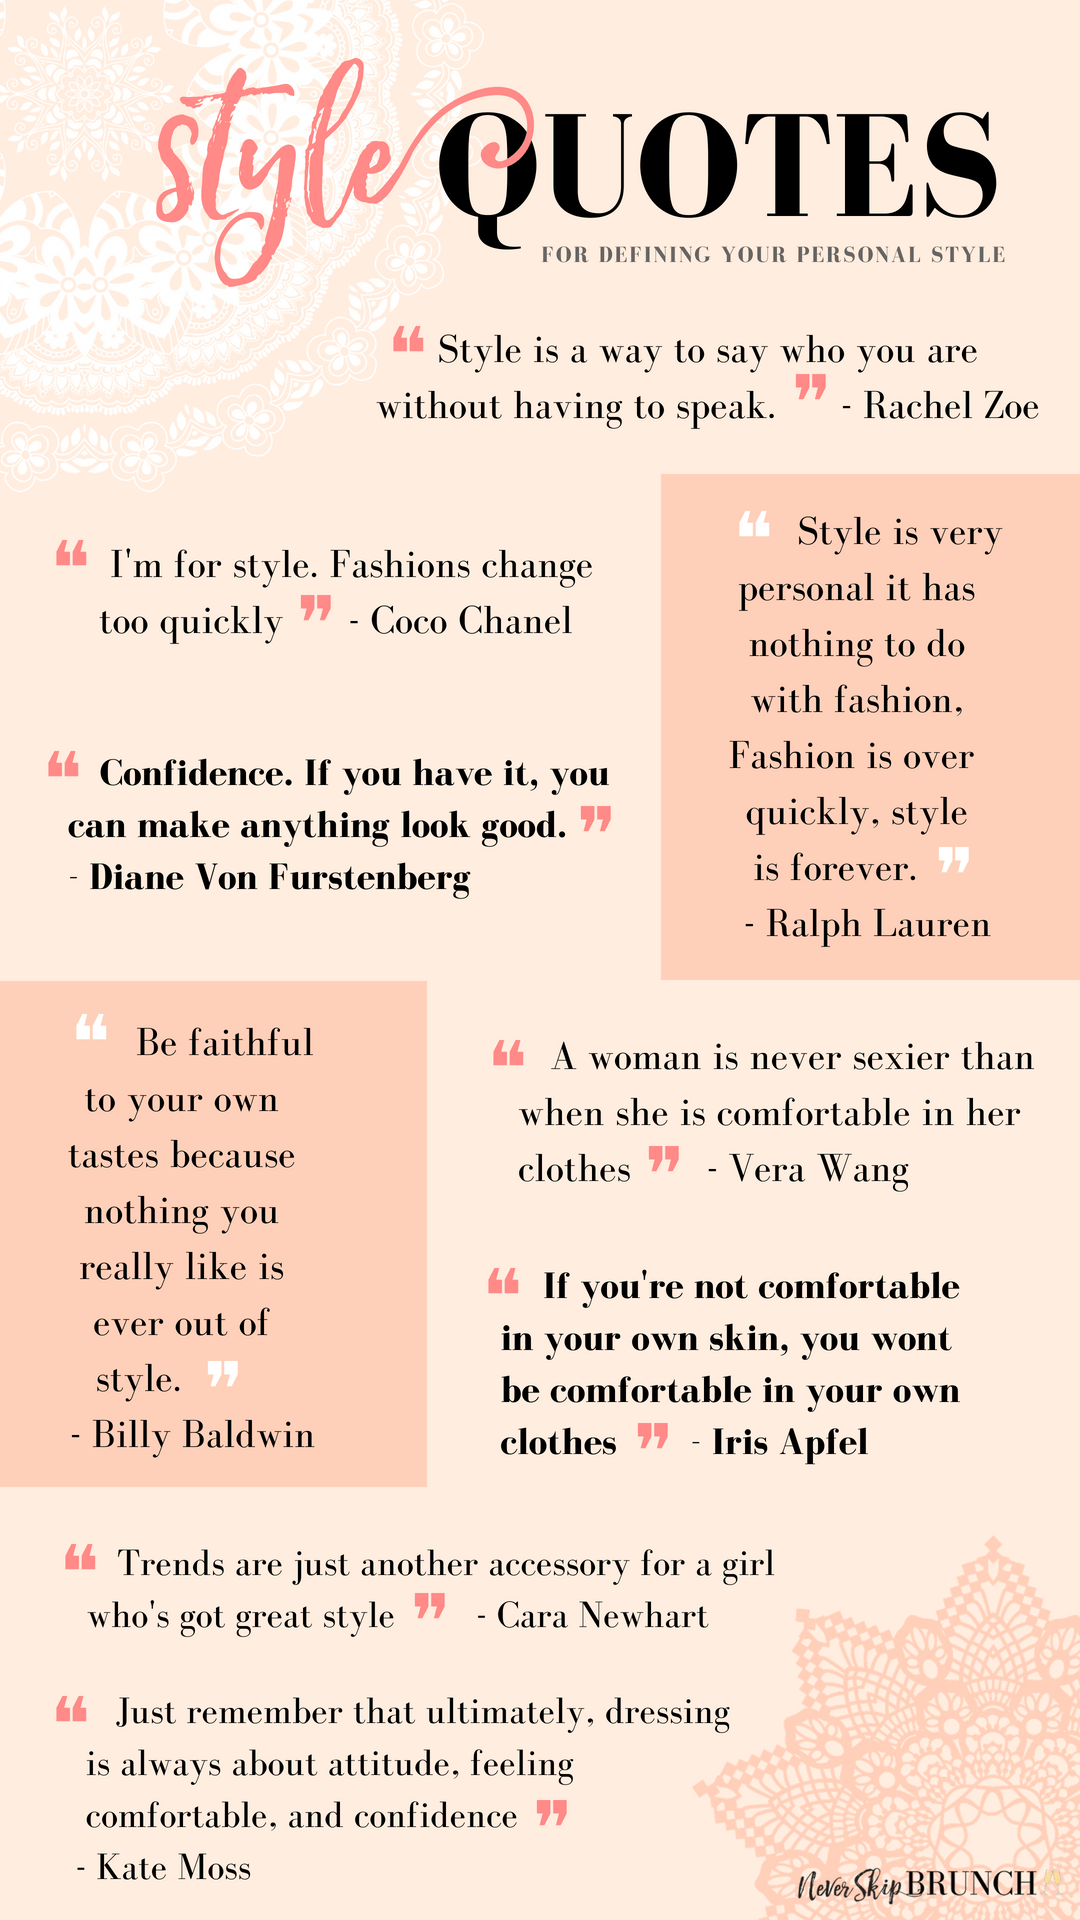 10 Q's to Find your Personal Style » NEVER SKIP BRUNCH - 10 Q's to Find your Personal Style » NEVER SKIP BRUNCH -   15 find your style Quotes ideas